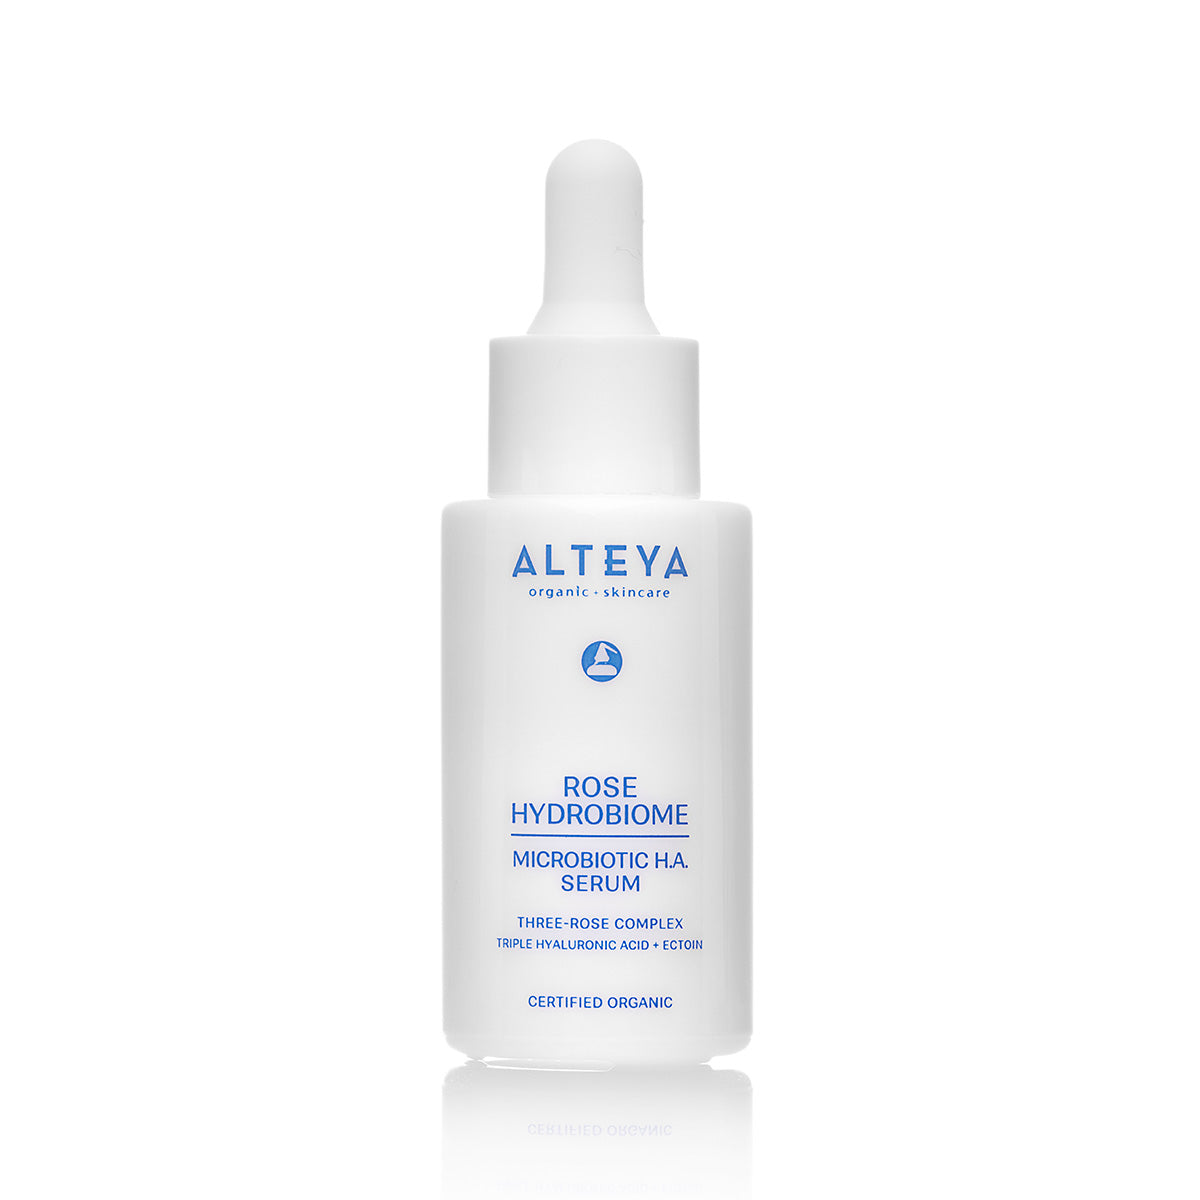  Microbiotic H.A. Serum is formulated to hydrate skin and strengthen its moisture barrier. It contains a synergetic blend of three molecular weights of Hyaluronic Acid to fortify and plump skin and reduce the appearance of lines and wrinkles. 